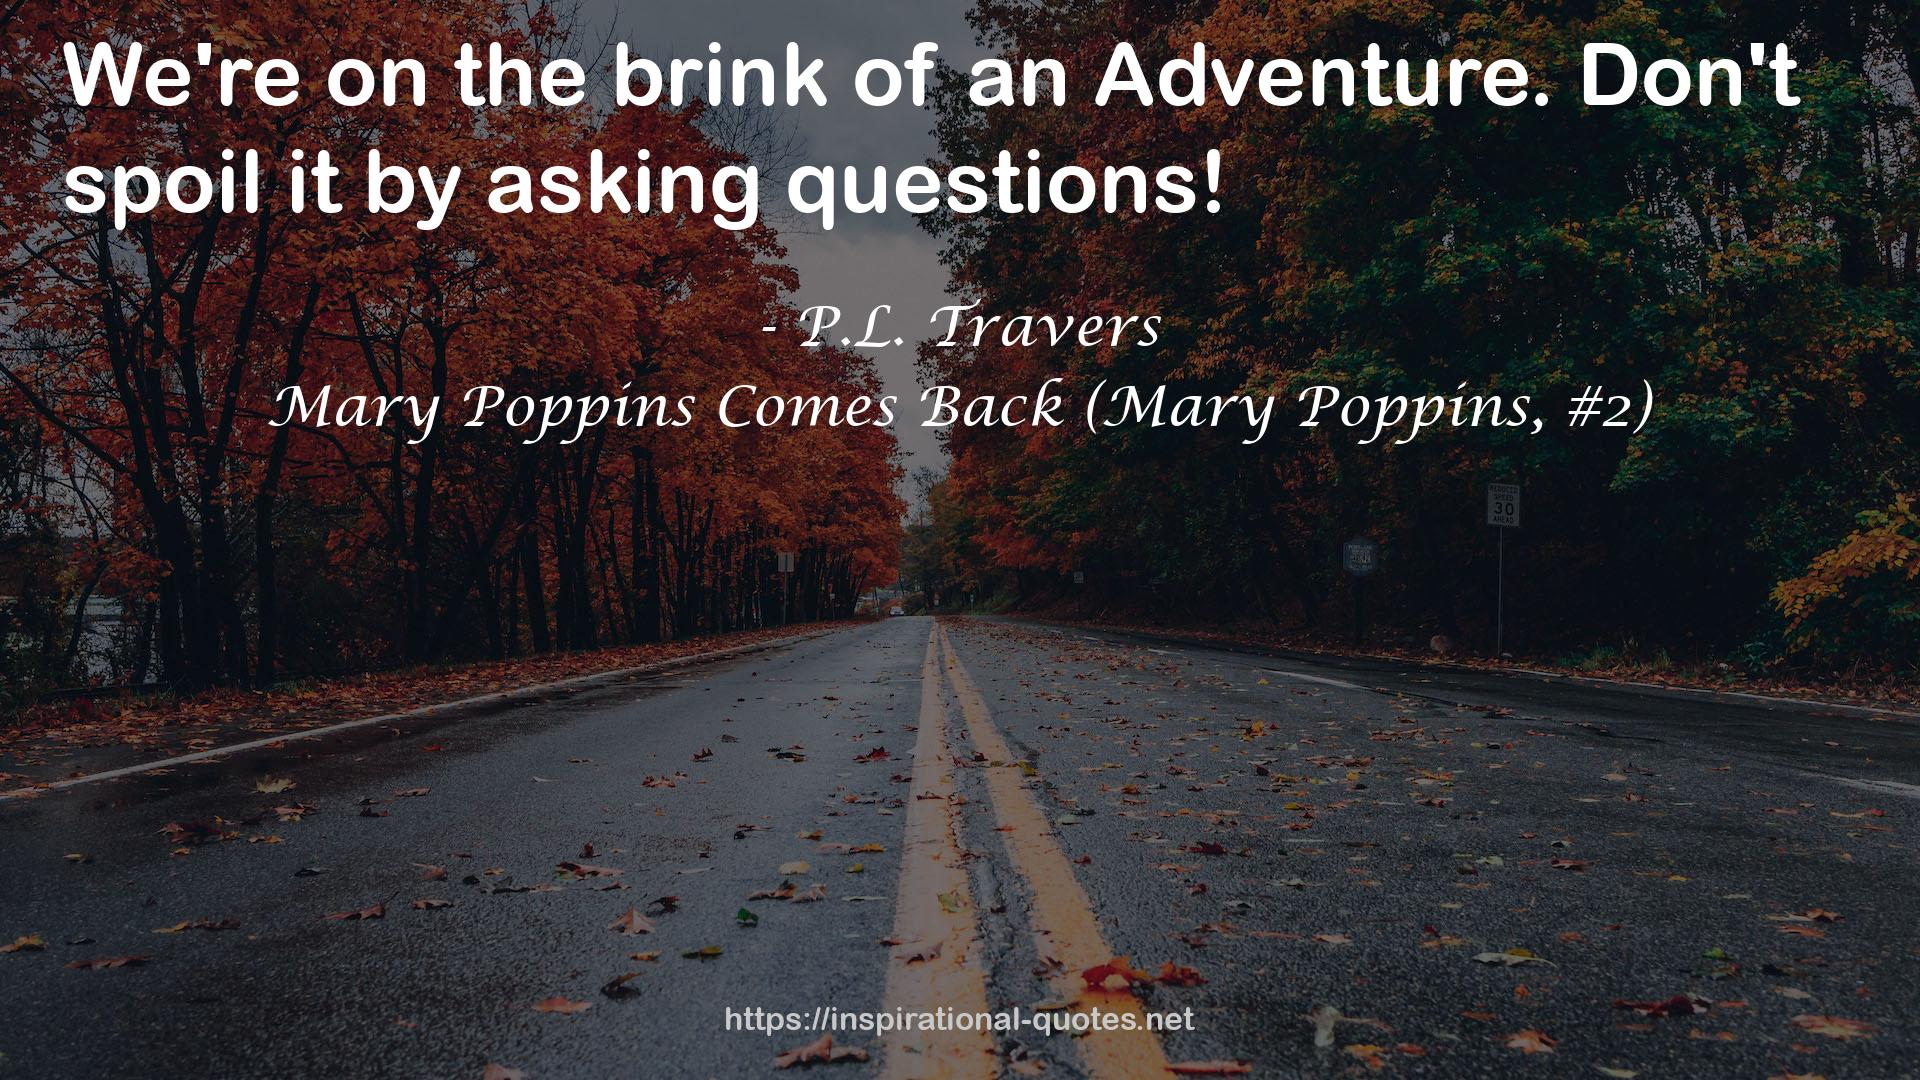 Mary Poppins Comes Back (Mary Poppins, #2) QUOTES